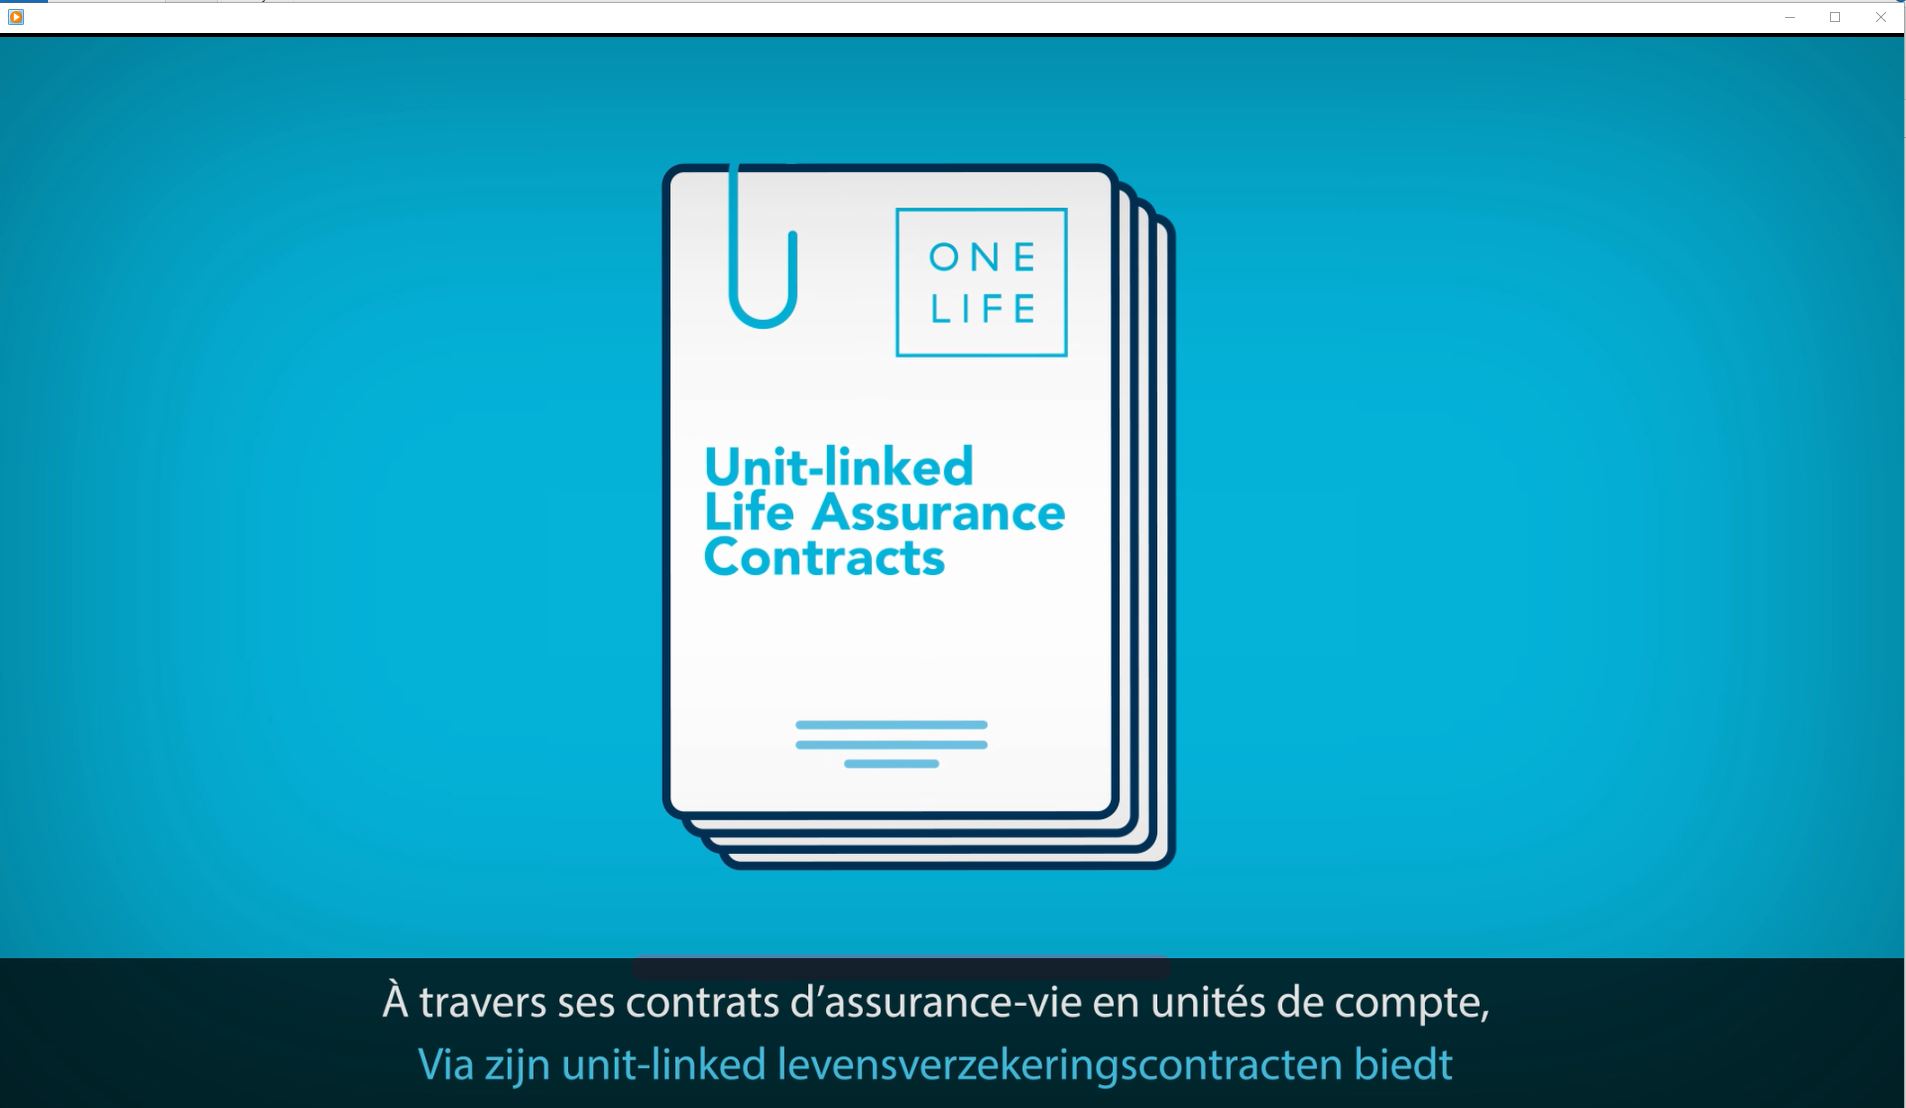 OneLife - Unit-linked life assurance contracts and non-traditional assets